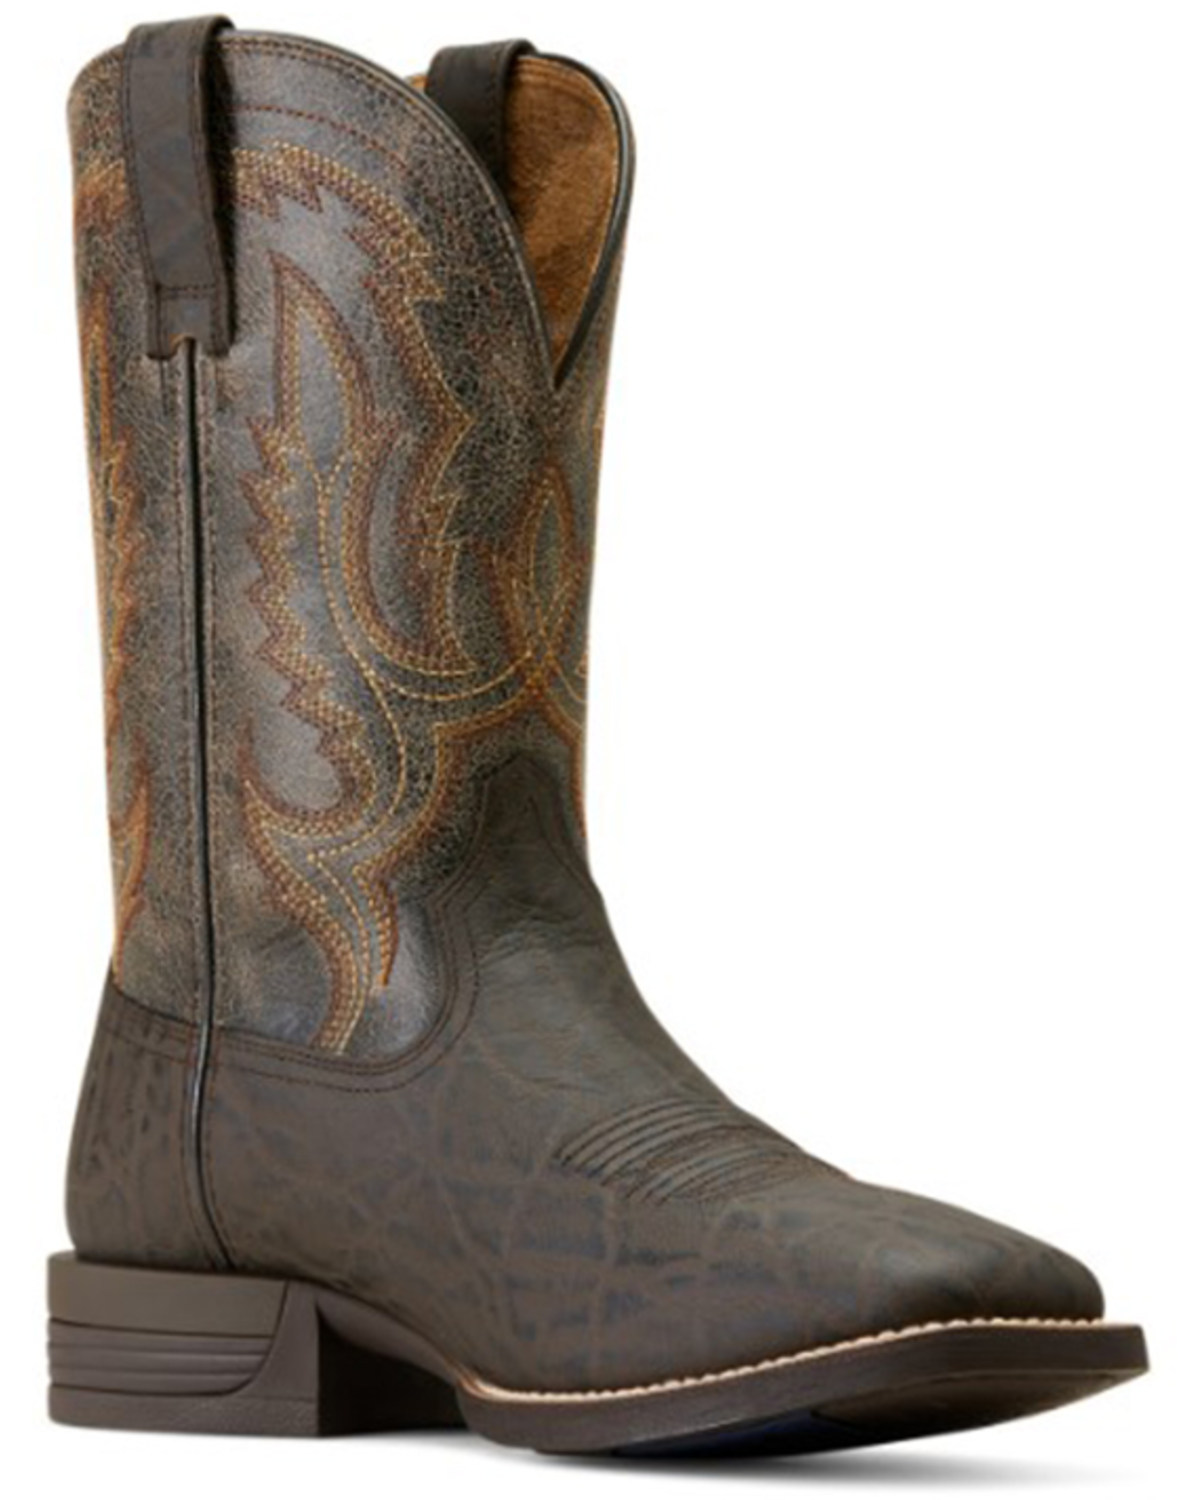 Ariat Men's Steadfast Elephant Print Western Performance Boots - Broad Square Toe